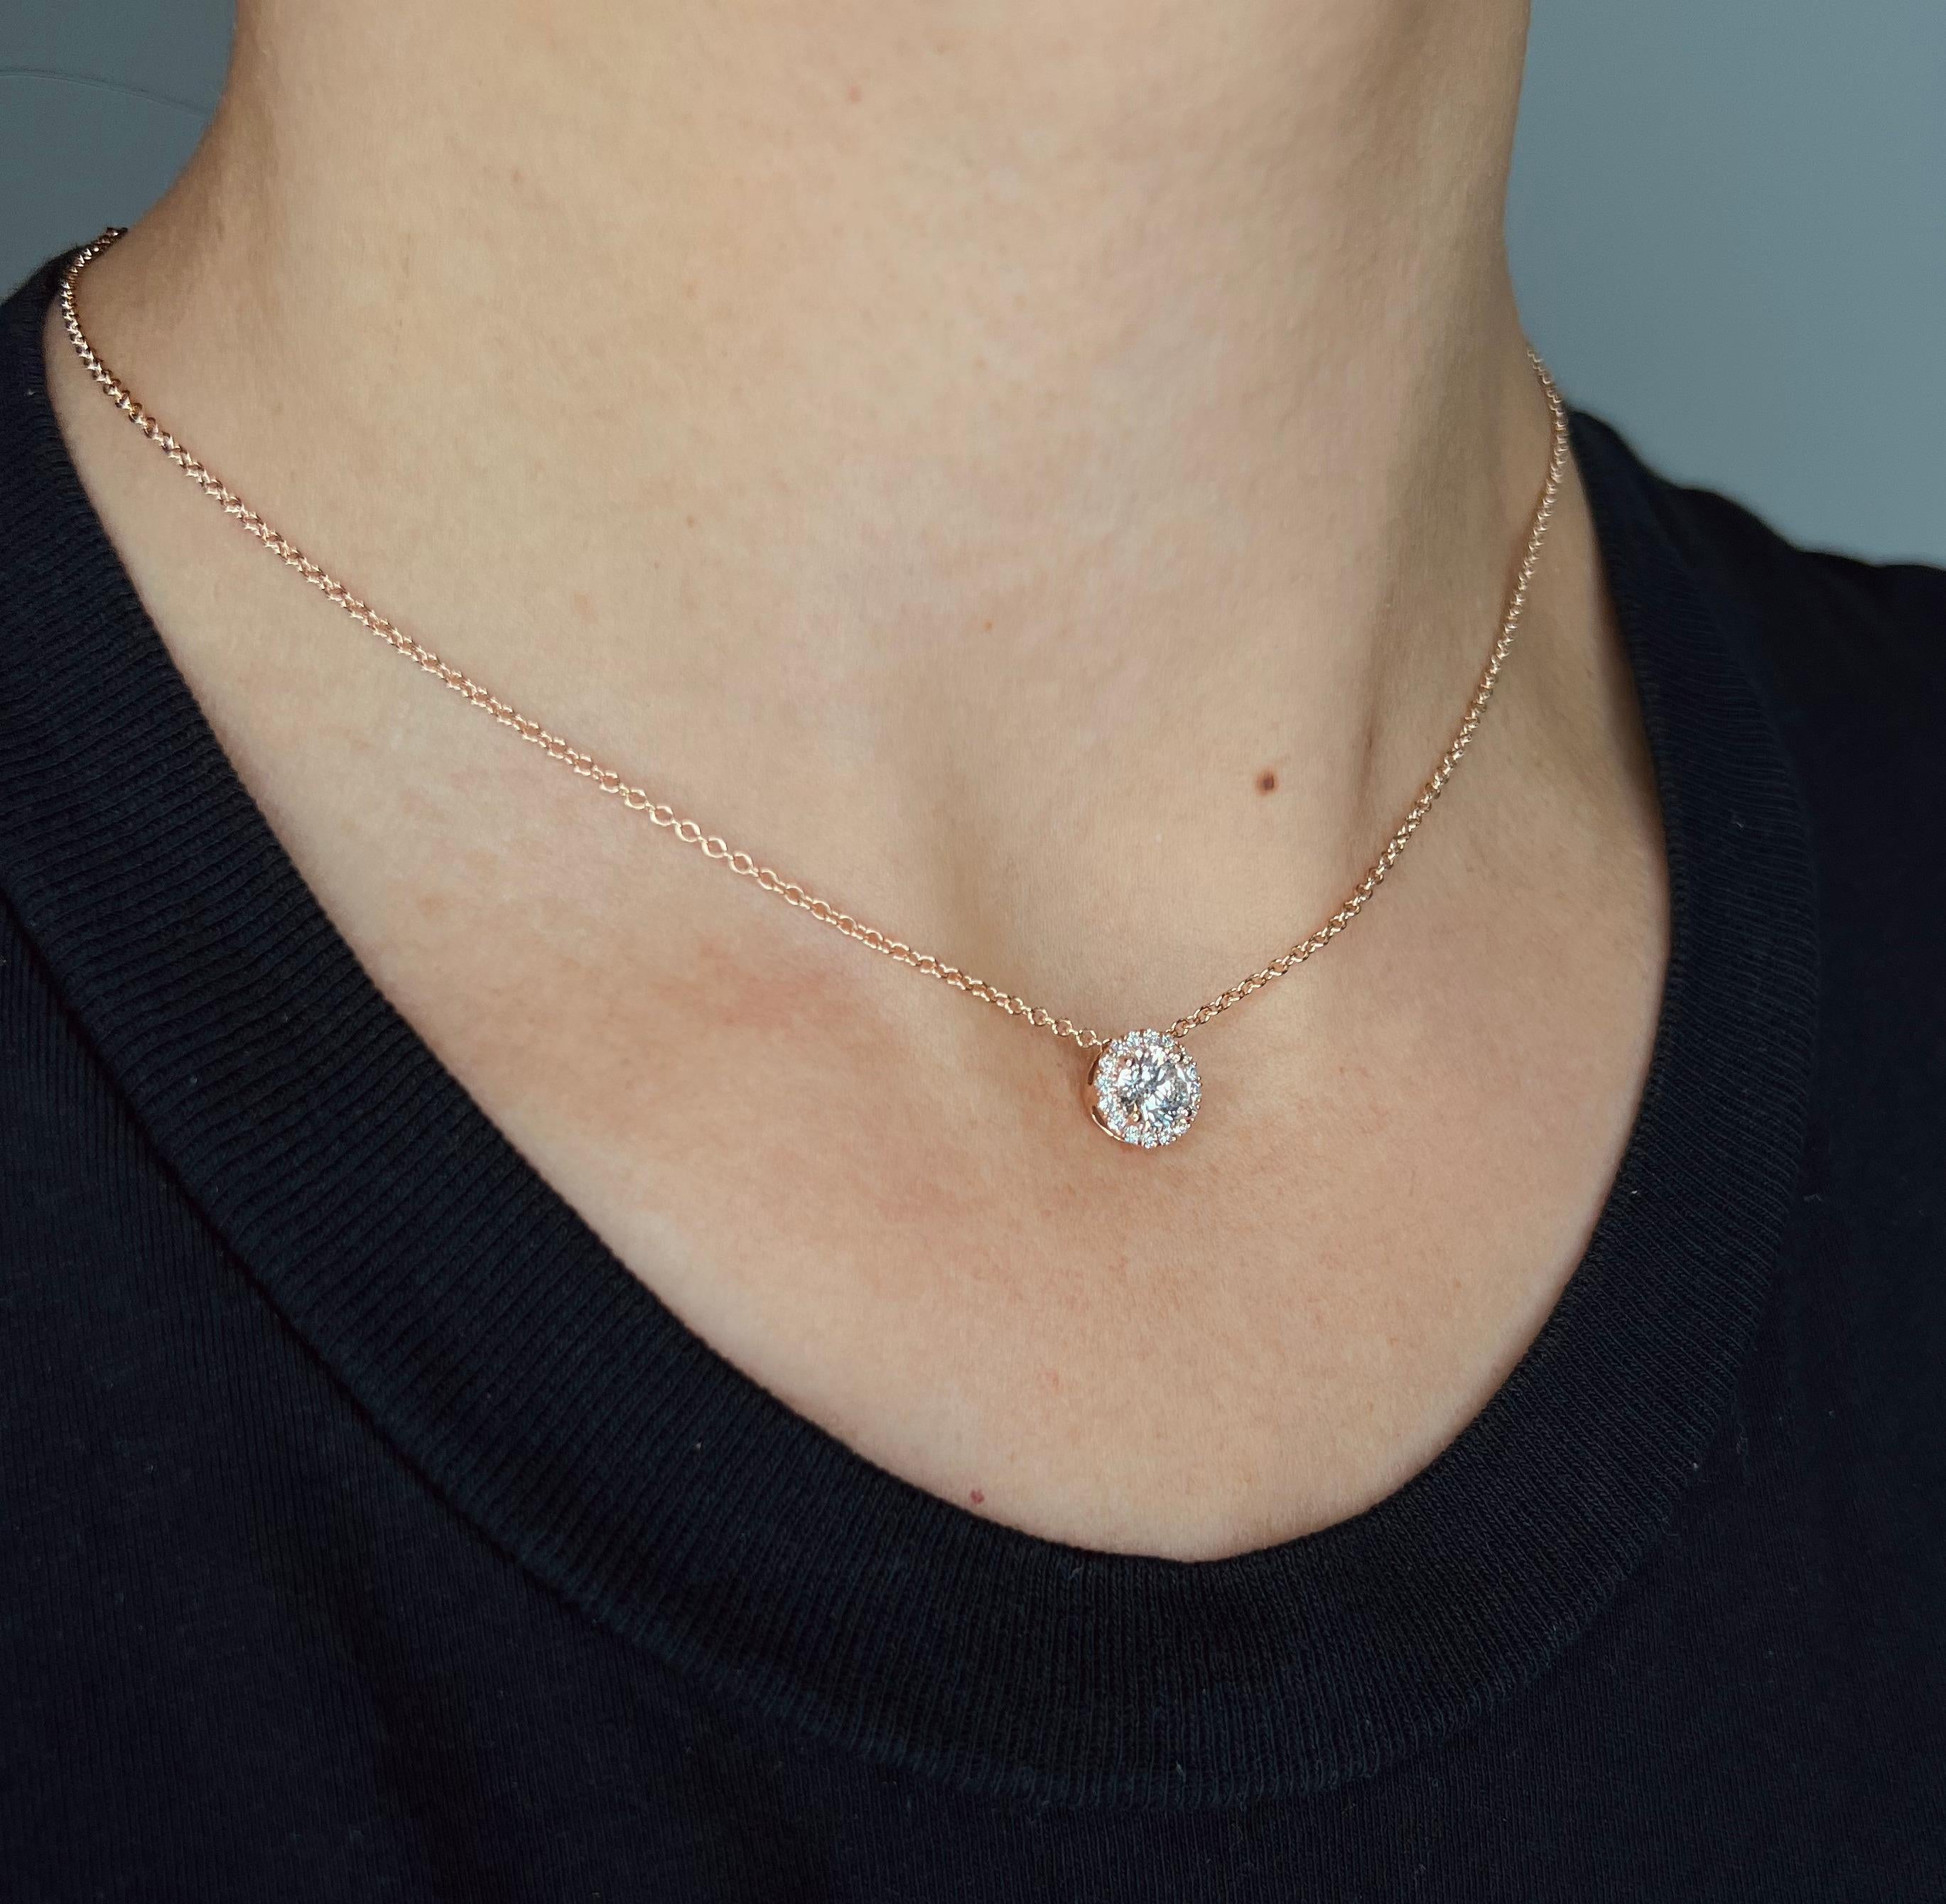 This diamond circle pendant provides a glowing chic look.
Metal: 14k Gold
Diamond Total Carats (Includes 0.15ct halo): 0.65 Total (0.50ct Center)
Diamond Cut: Round Natural Diamonds (Not Lab Grown)
Diamond Clarity: VS
Diamond Color: F
Color: White